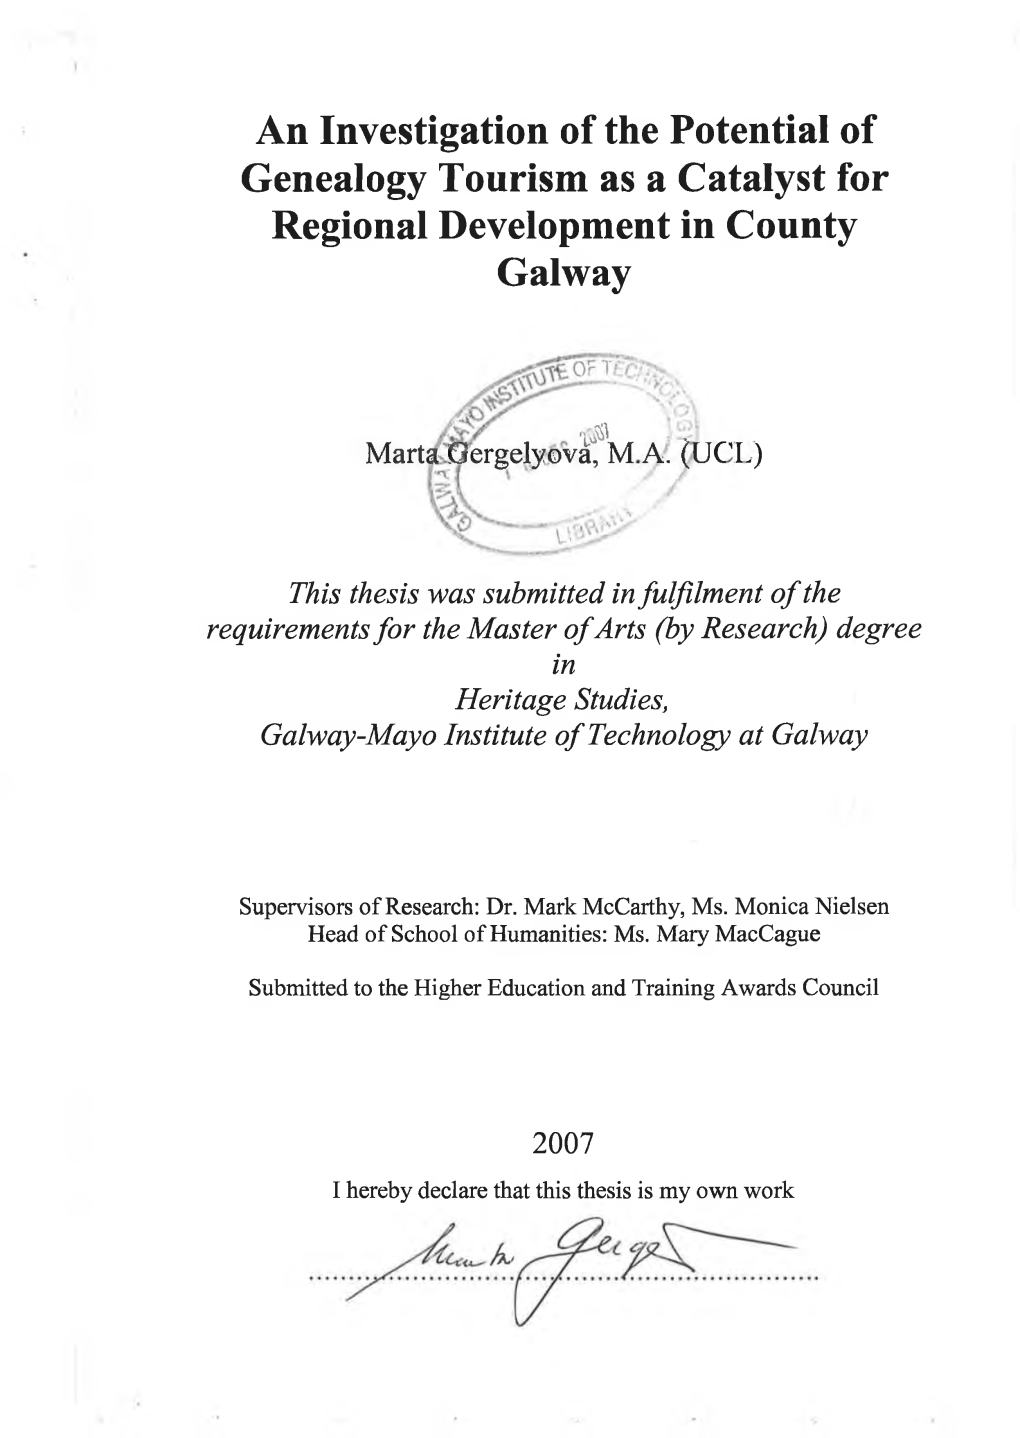 An Investigation of the Potential of Genealogy Tourism As a Catalyst for Regional Development in County Galway